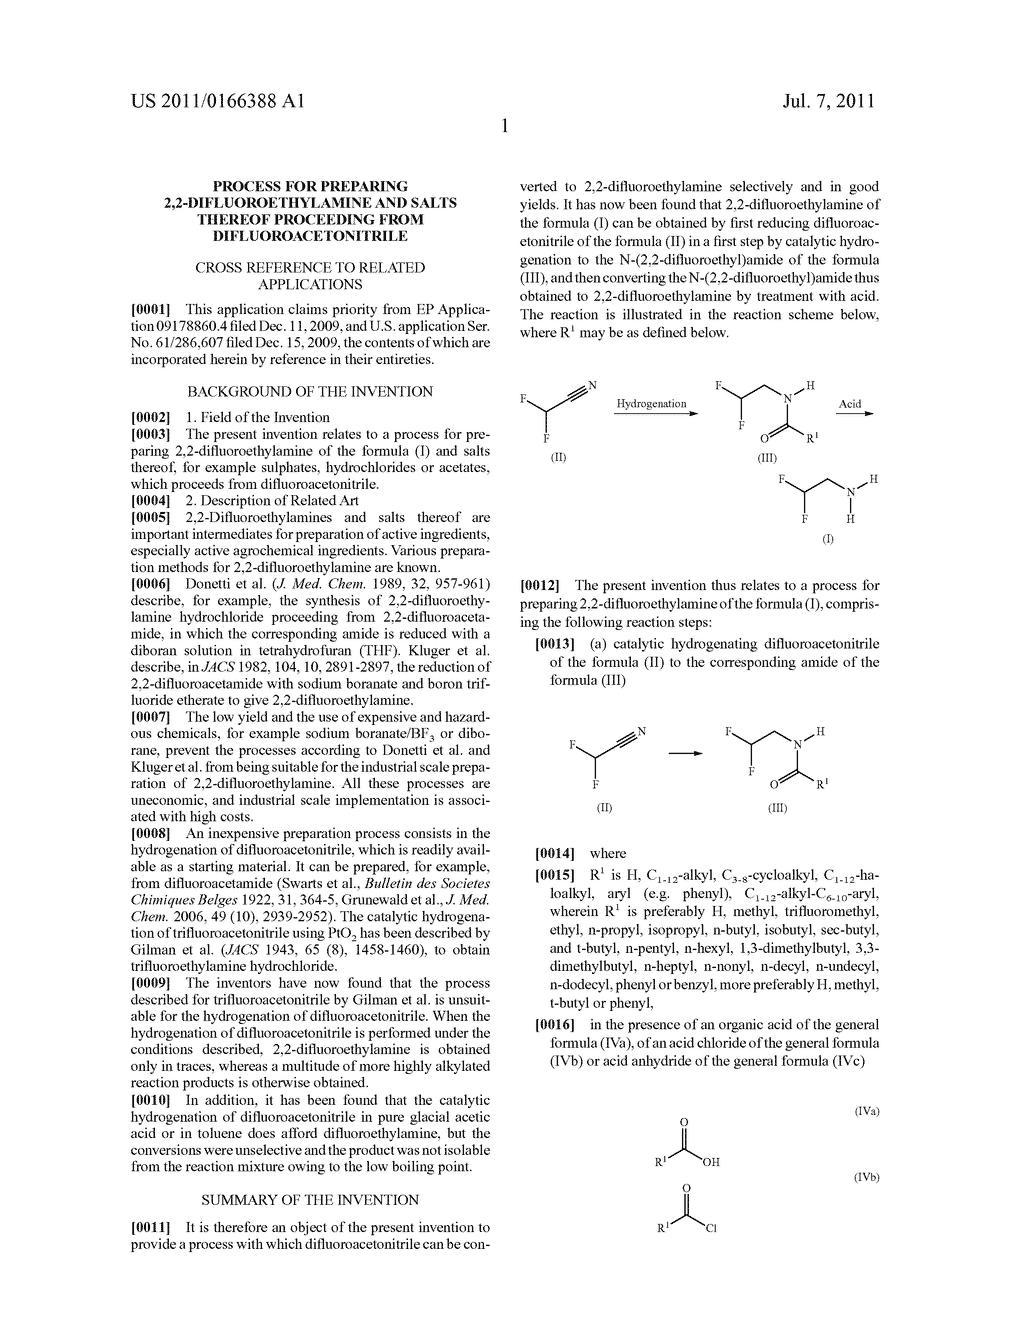 PROCESS FOR PREPARING 2,2-DIFLUOROETHYLAMINE AND SALTS THEREOF PROCEEDING     FROM DIFLUOROACETONITRILE - diagram, schematic, and image 02